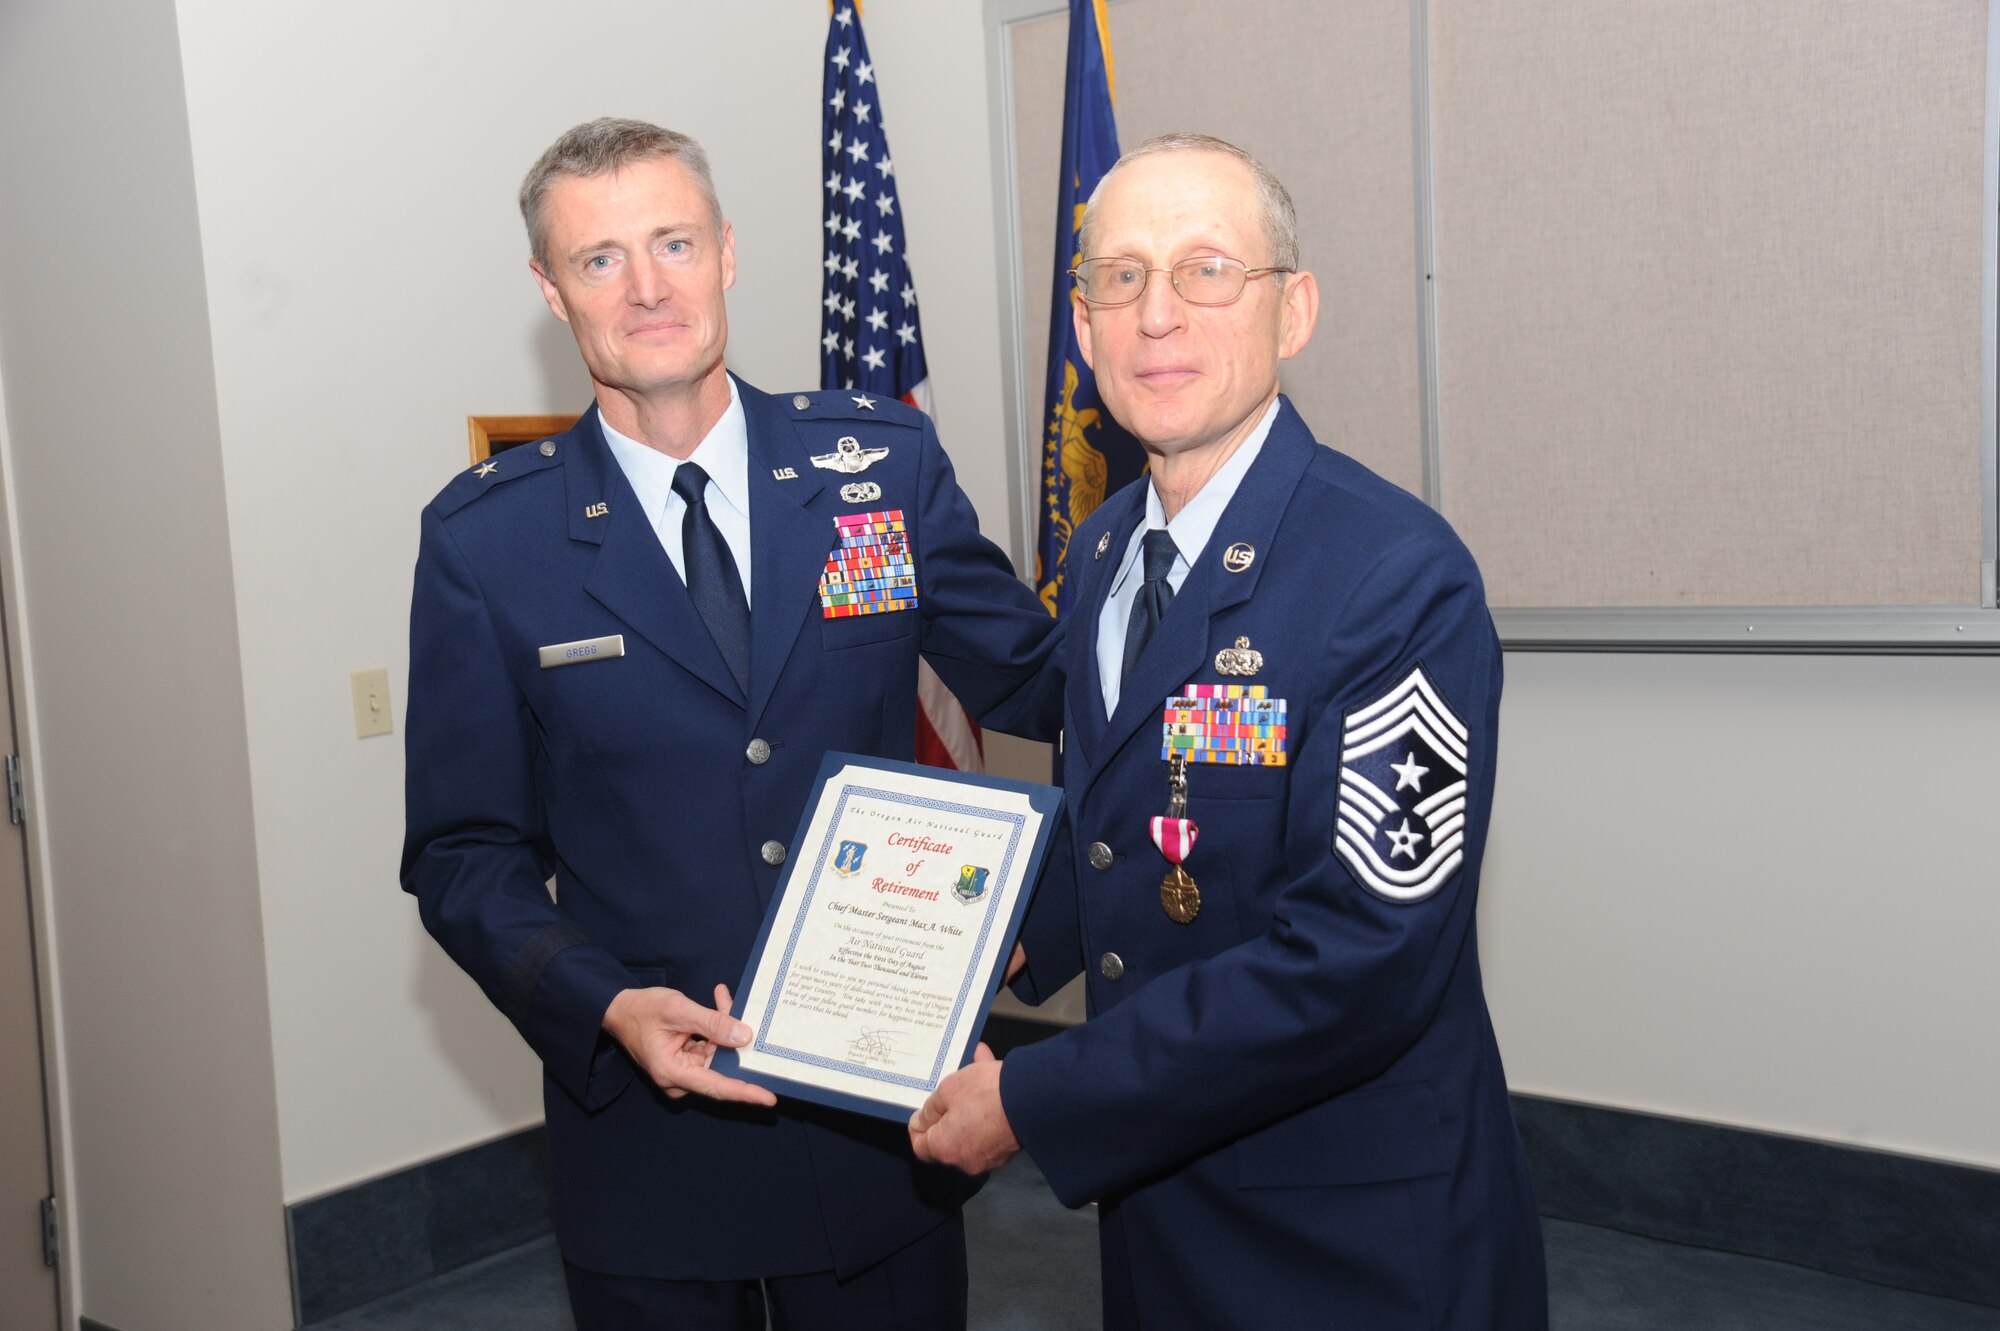 PORTLAND, Ore. - Command Chief Max White was honored in a ceremony to celebrate his retirement on October 16.Oregon Air National Guard Commander, Brig. Gen. Steven Gregg presents Command Chief with a Certificate of Retirement.( Air Force photo by Tech. Sgt John Hughel)